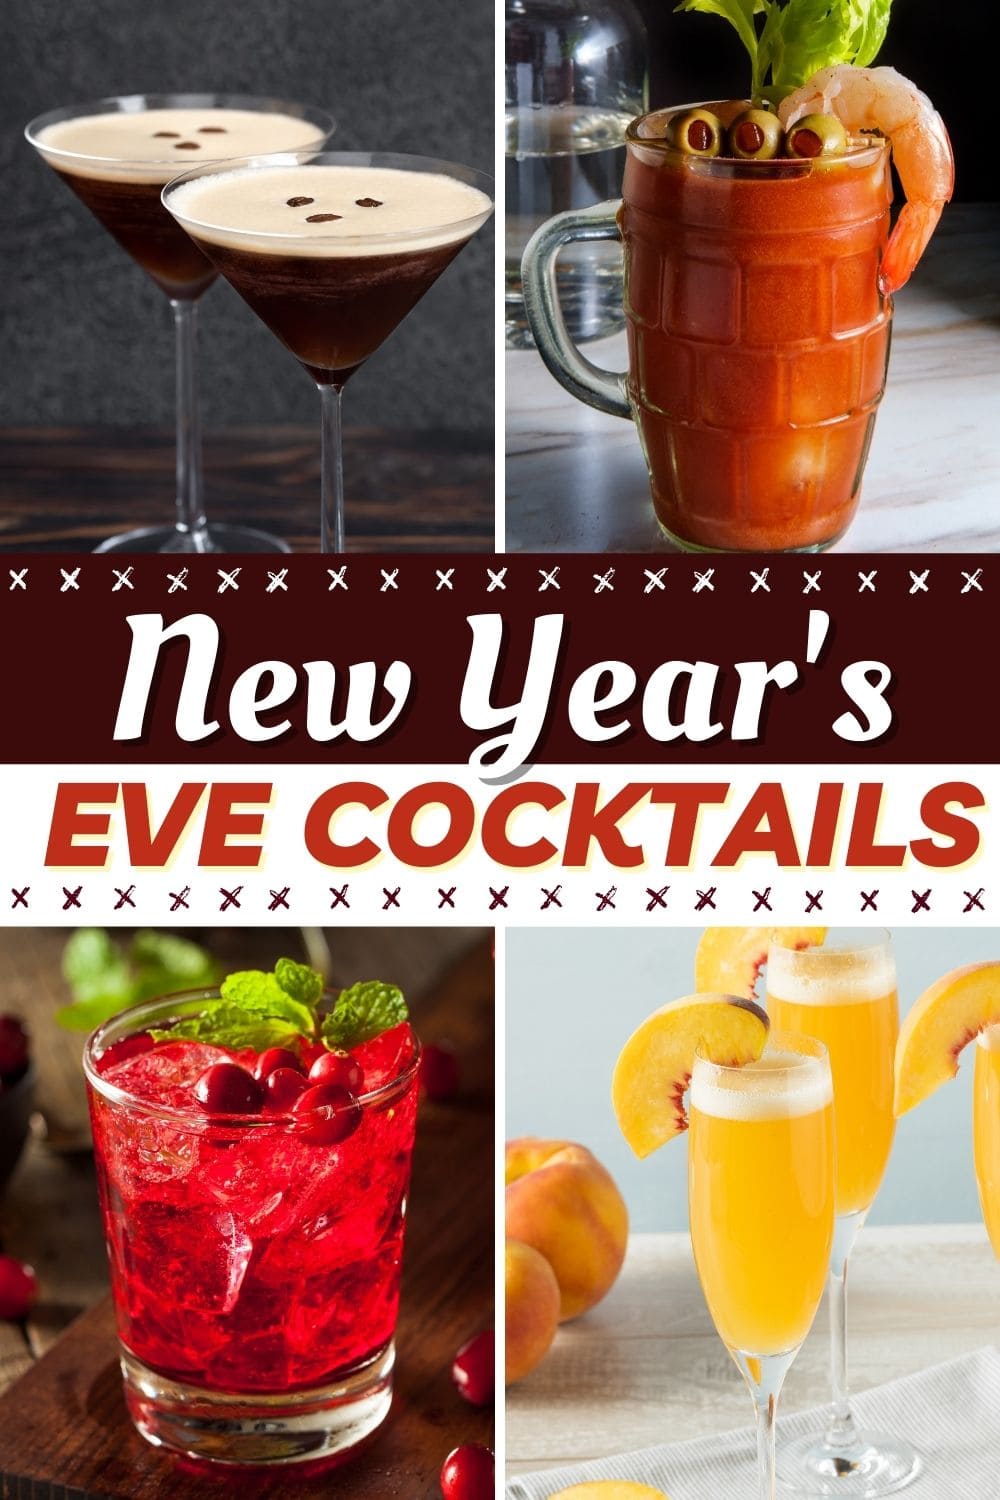 20 Fun New Year’s Eve Cocktails - Insanely Good